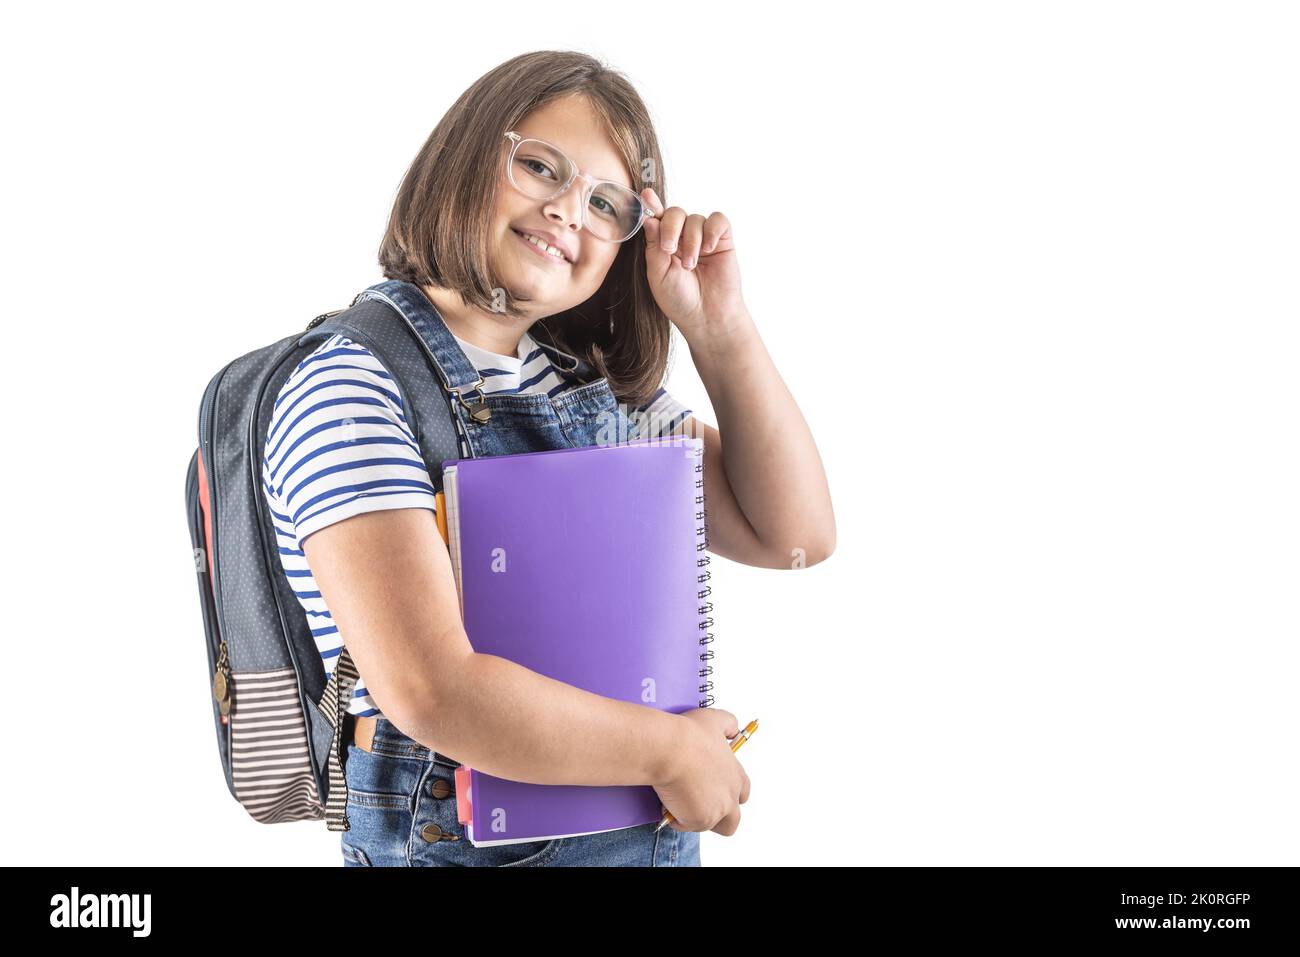 Schoolgirl fixes her glasses as she holds her study books and wears backpack. Stock Photo